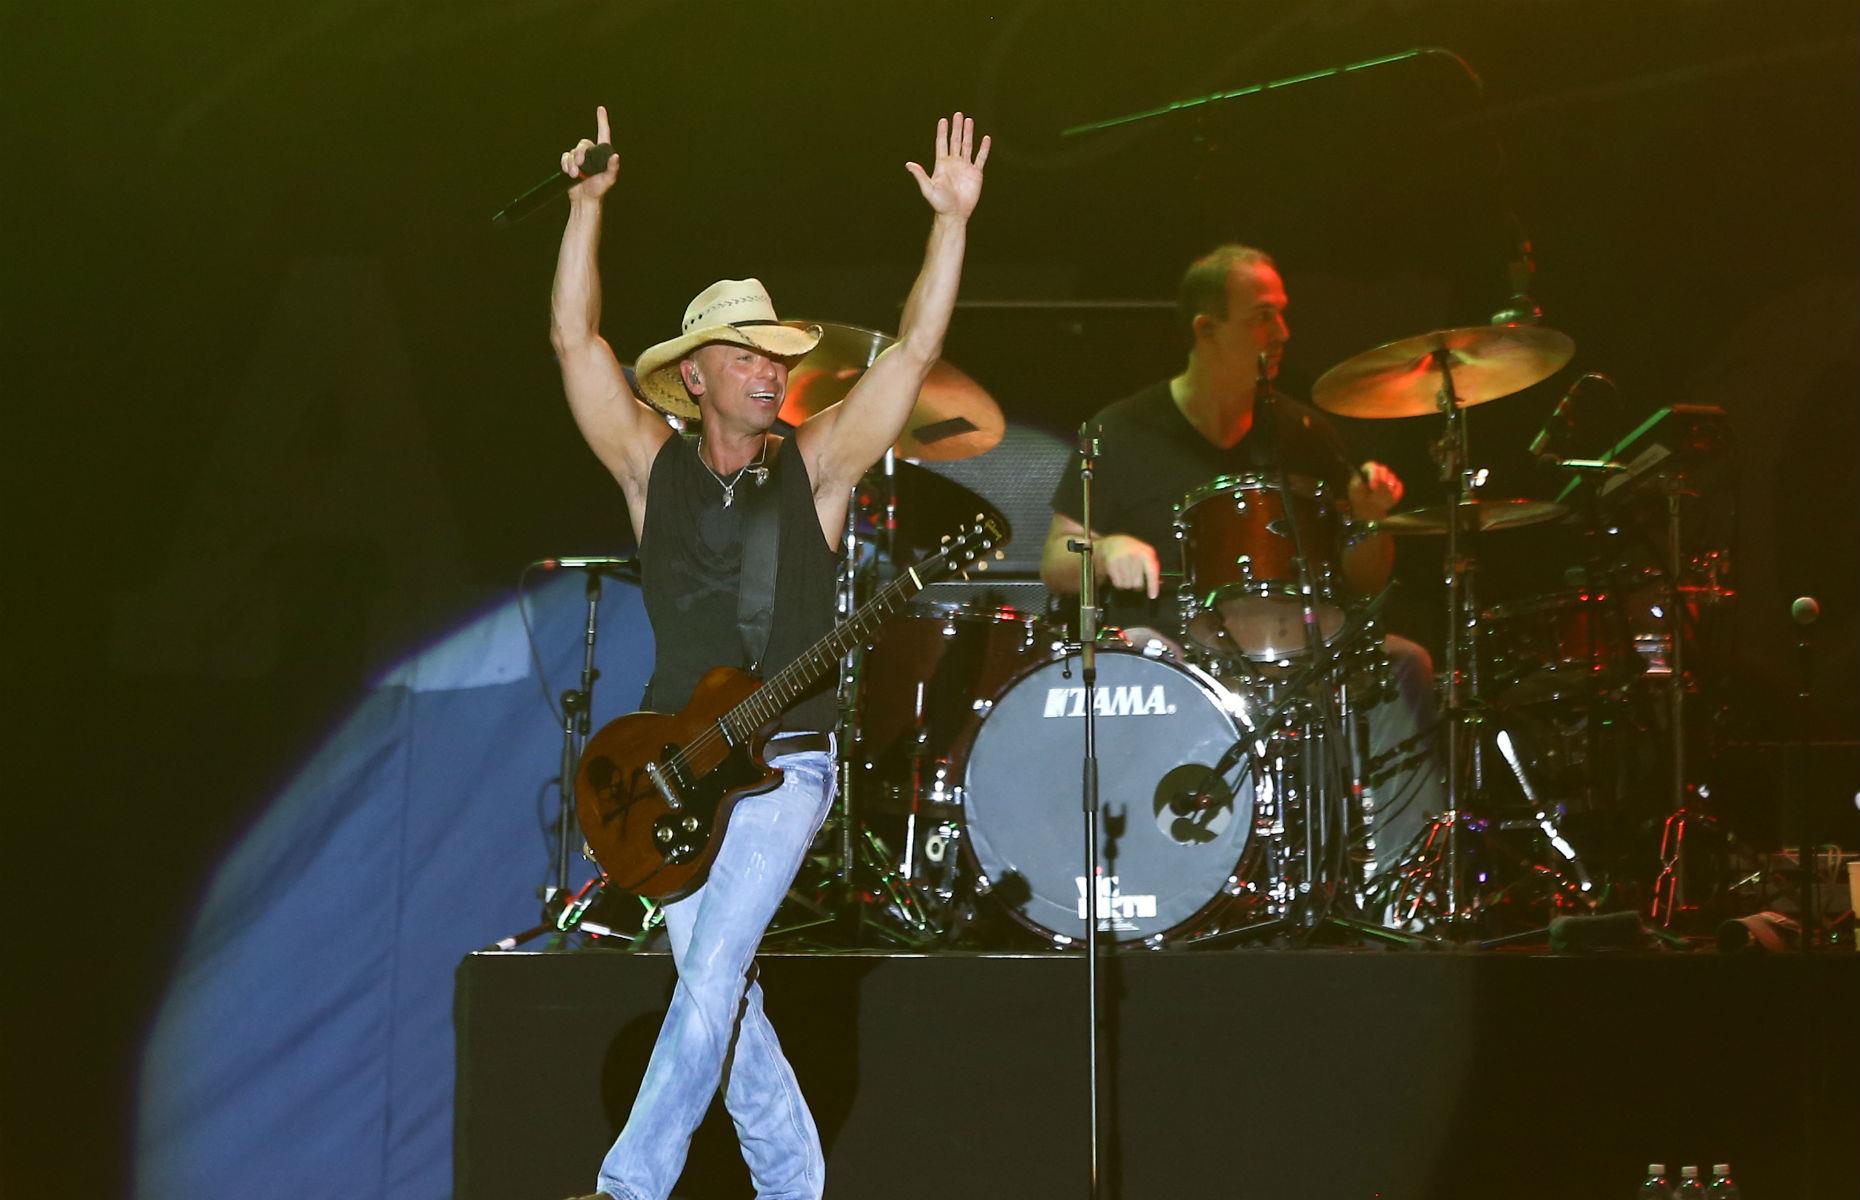 26 joint) Kenny Chesney